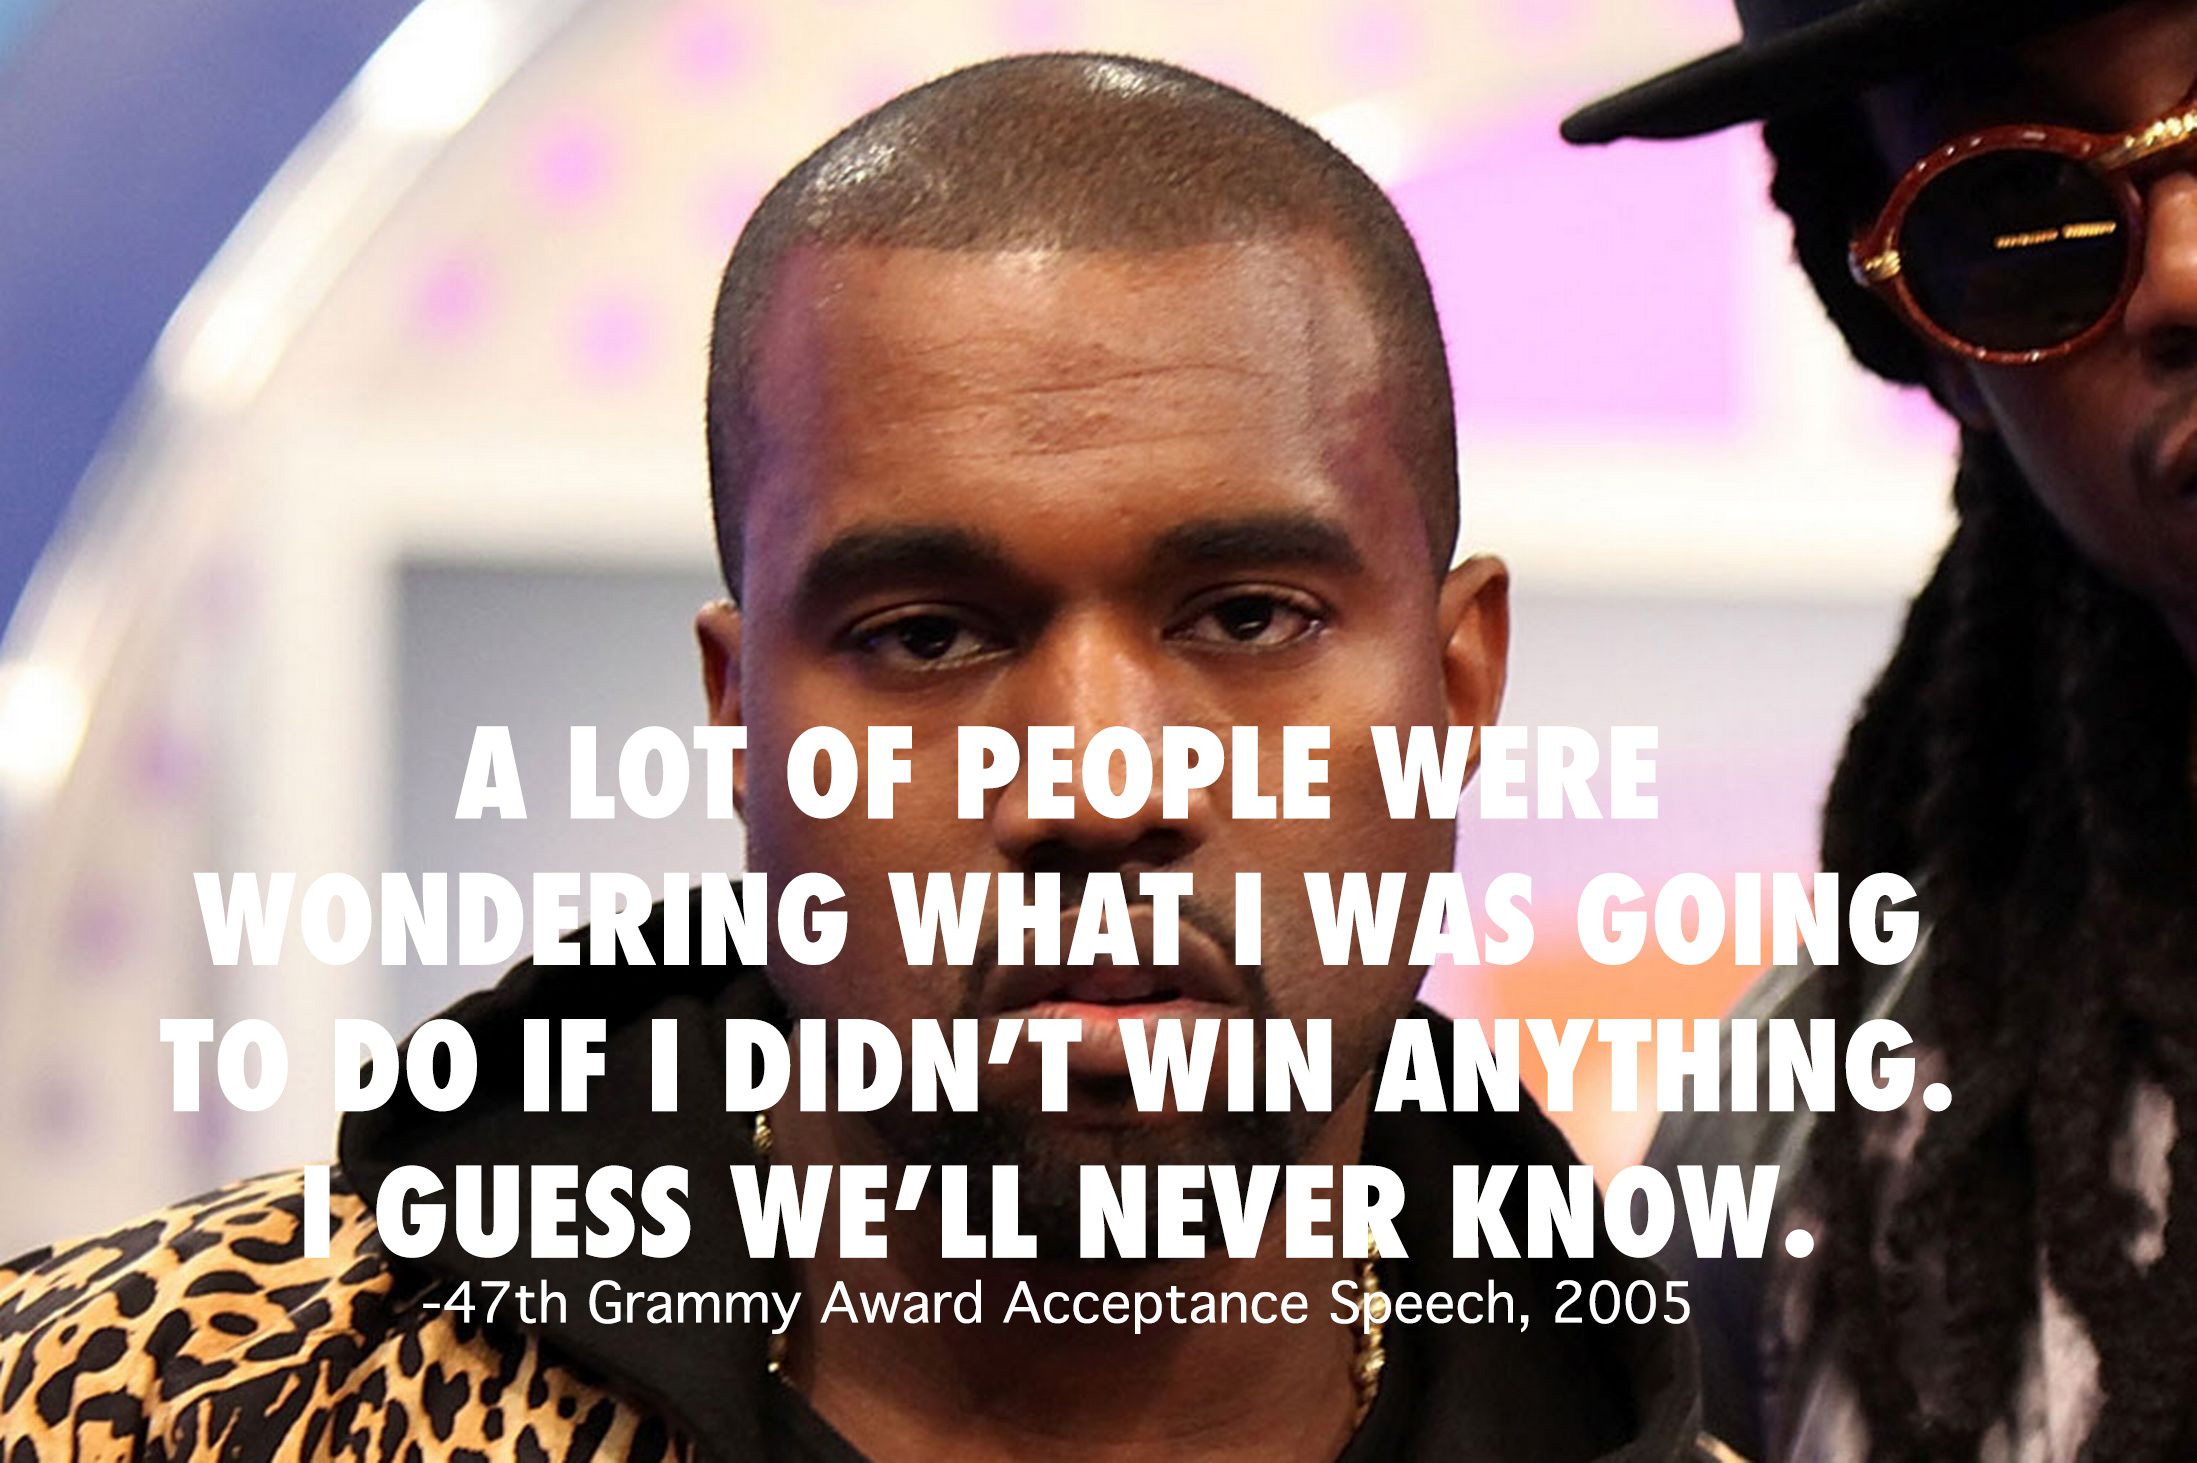 people with god complex - A Lot Of People Were Wondering What I Was Going To Do If I Didn'T Win Anything. 24GUESS We'Ll Never Know. 47th Grammy Award Acceptance Speech, 2005